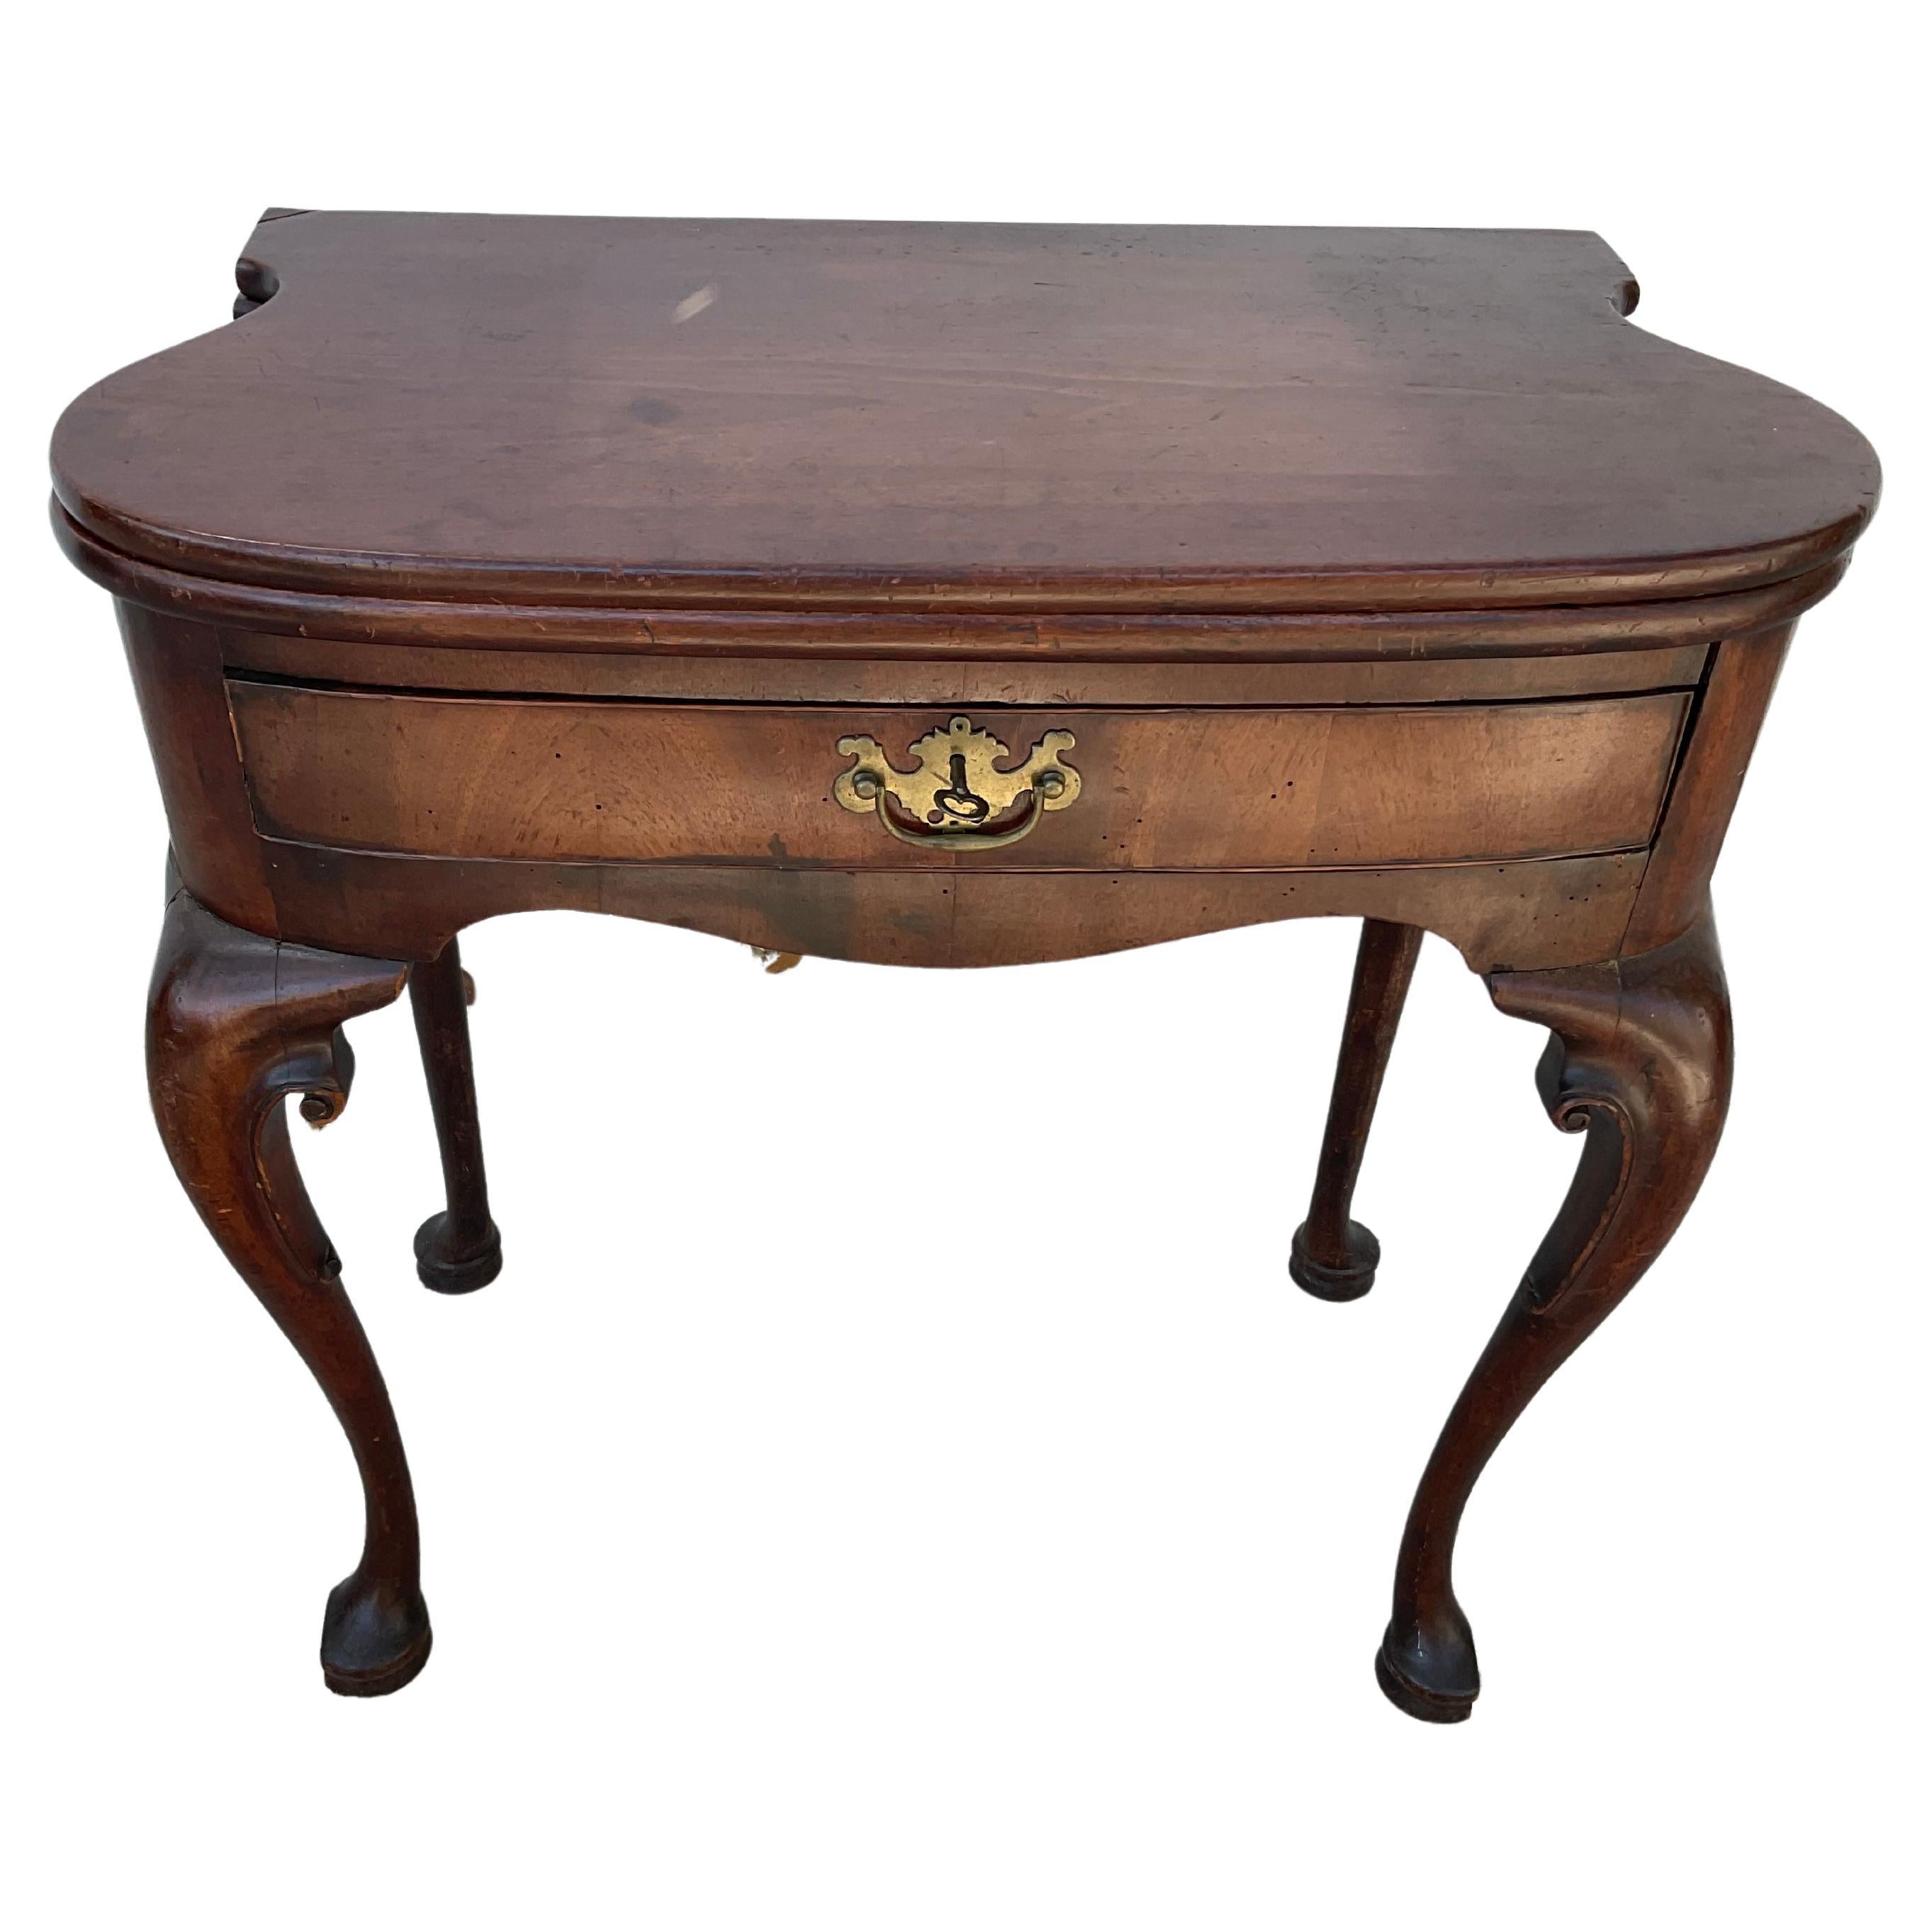 18th century George II mahogany game / tea table. Has flip top and one drawer. Table is 30.75 inches when opened. This is a rare form with the exaggerated shaped sides. Wonderful old warm rich patina.